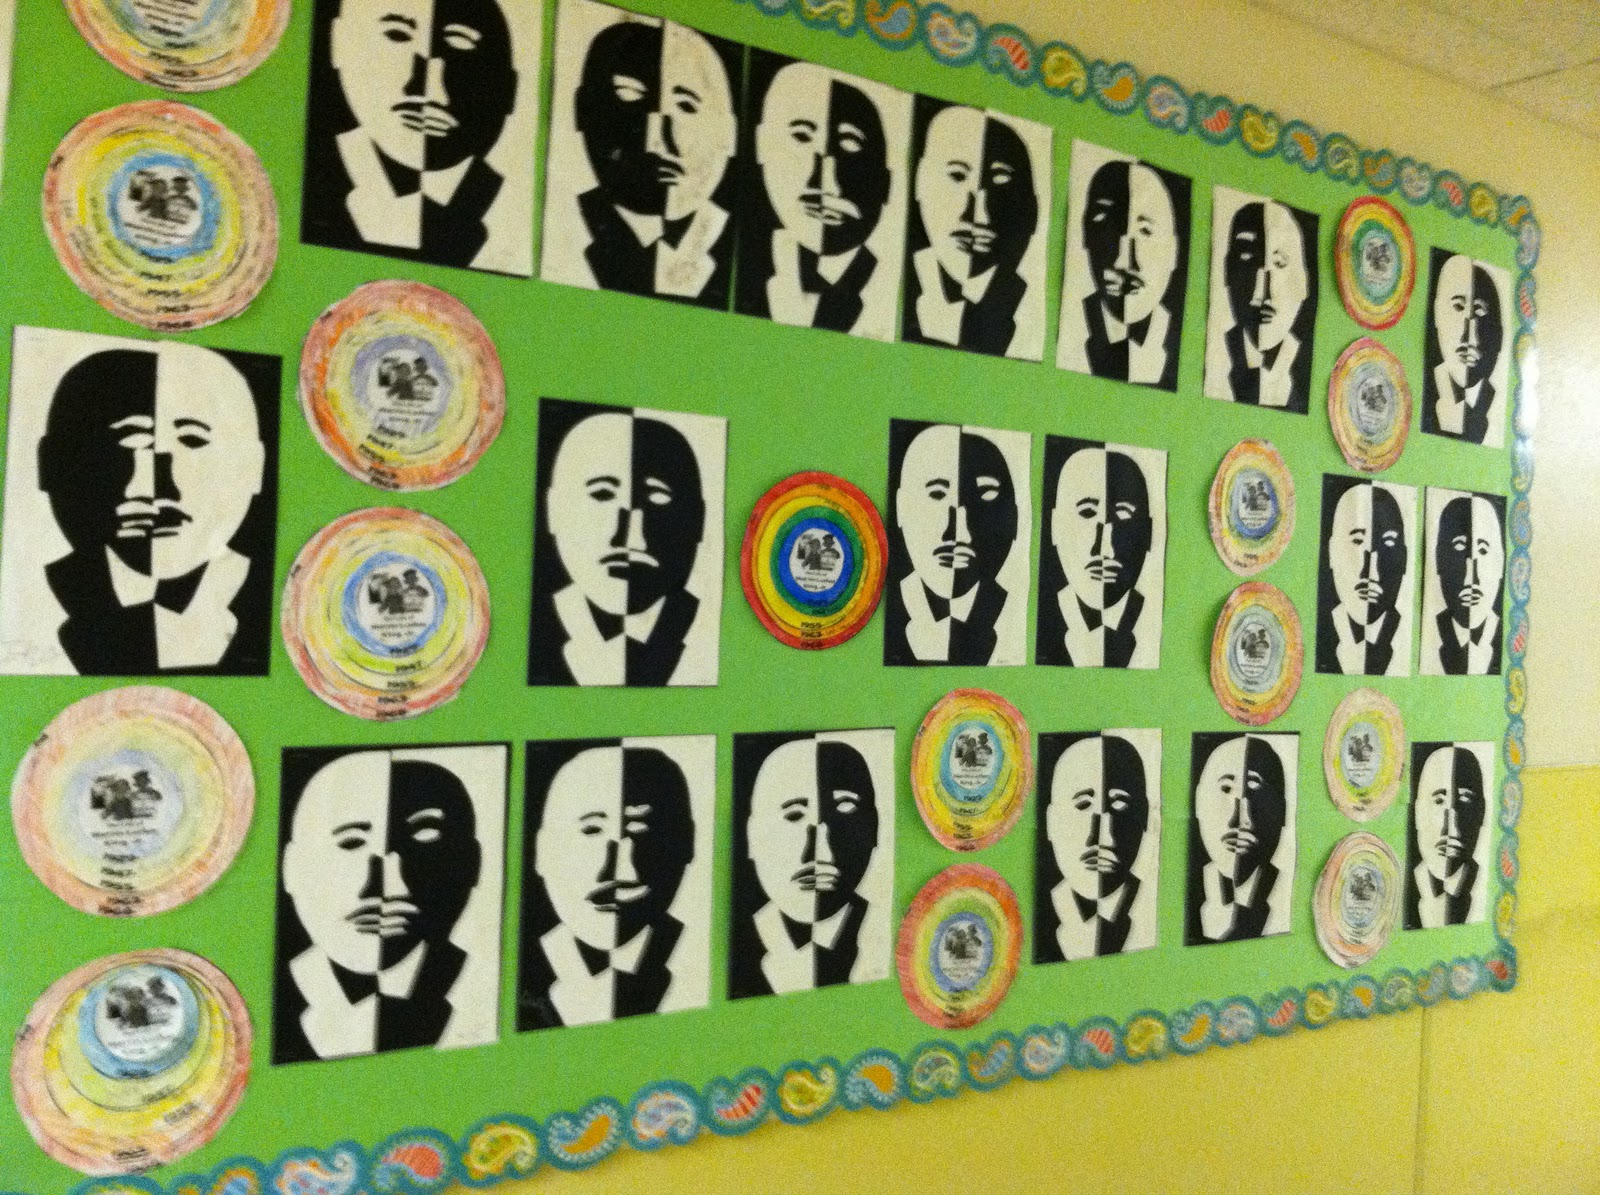 3rd grade book report on martin luther king jr